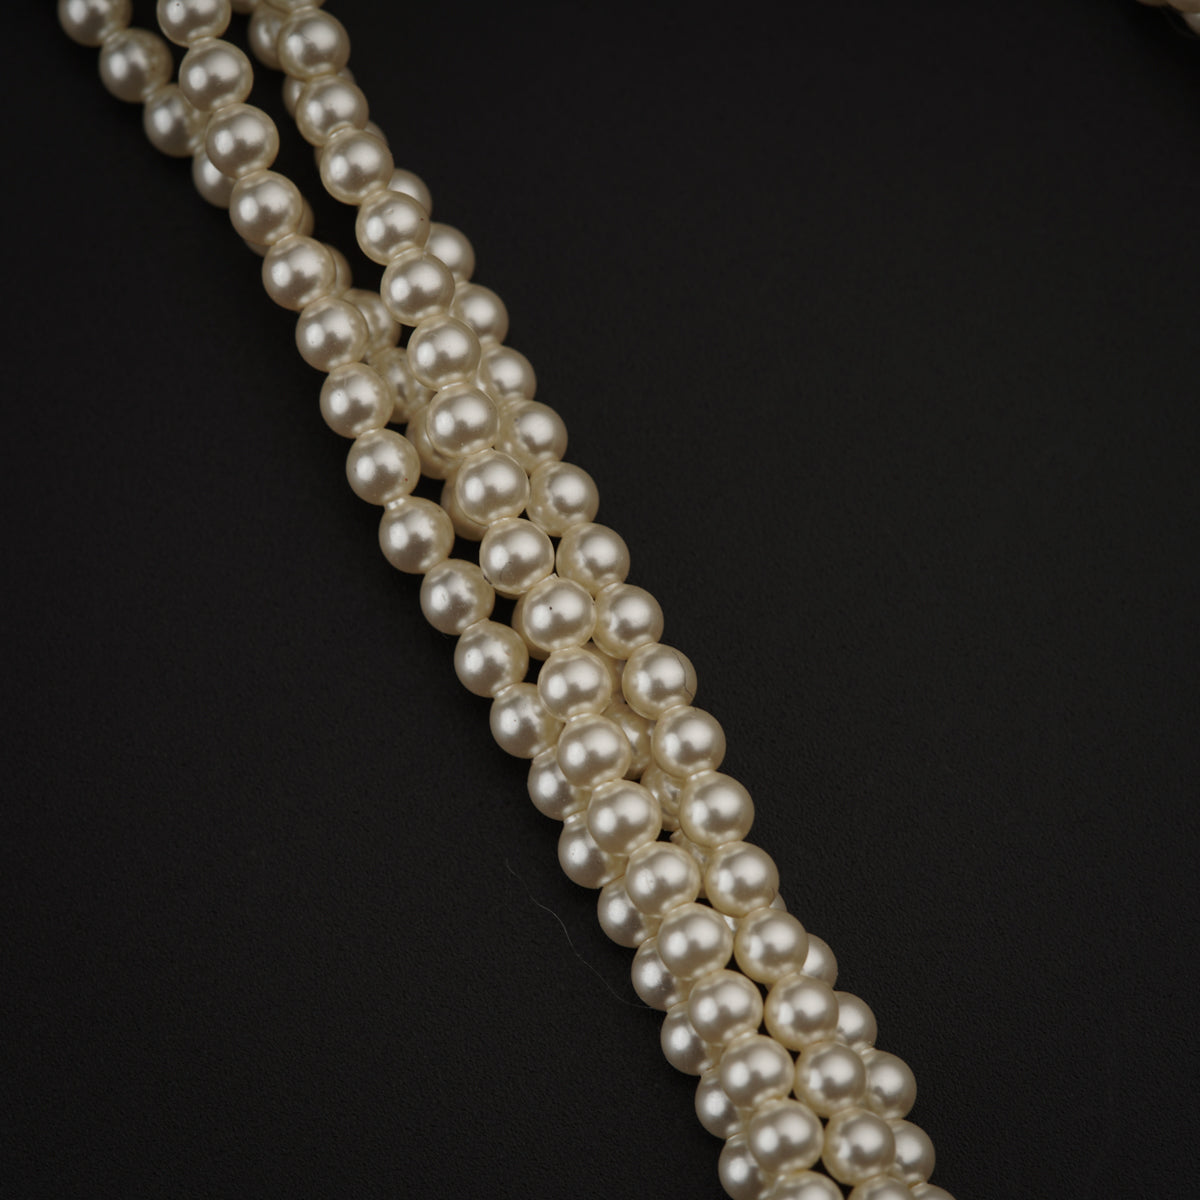 Filigree Silver Bead Motif Necklace with Pearls Gold Plated